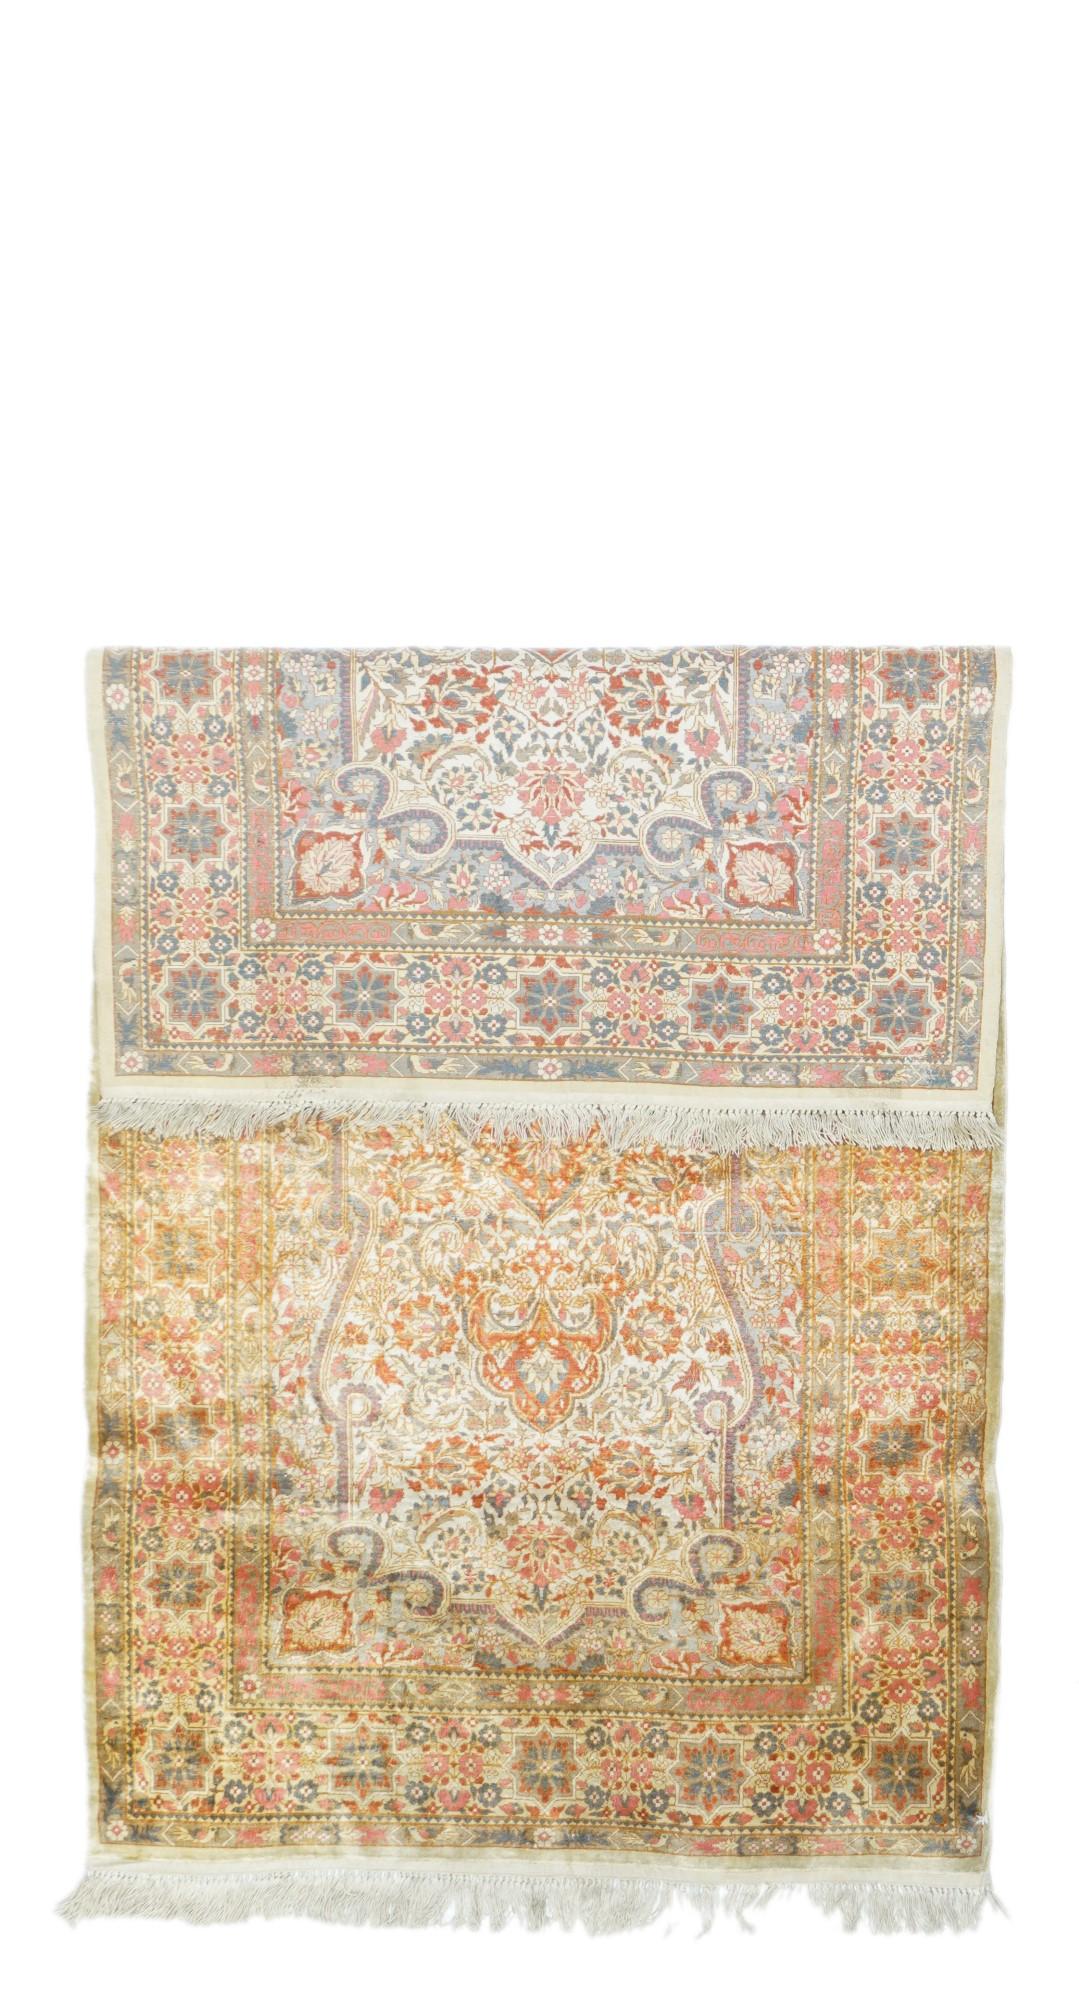  In the Persian Kashan style, this extremely fine ruglet shows a light palette including: beige, rust, teal and straw. Tall pointed elliptical medallion on a beige field with looped beige corners. Main border with octogrammes. As new condition.